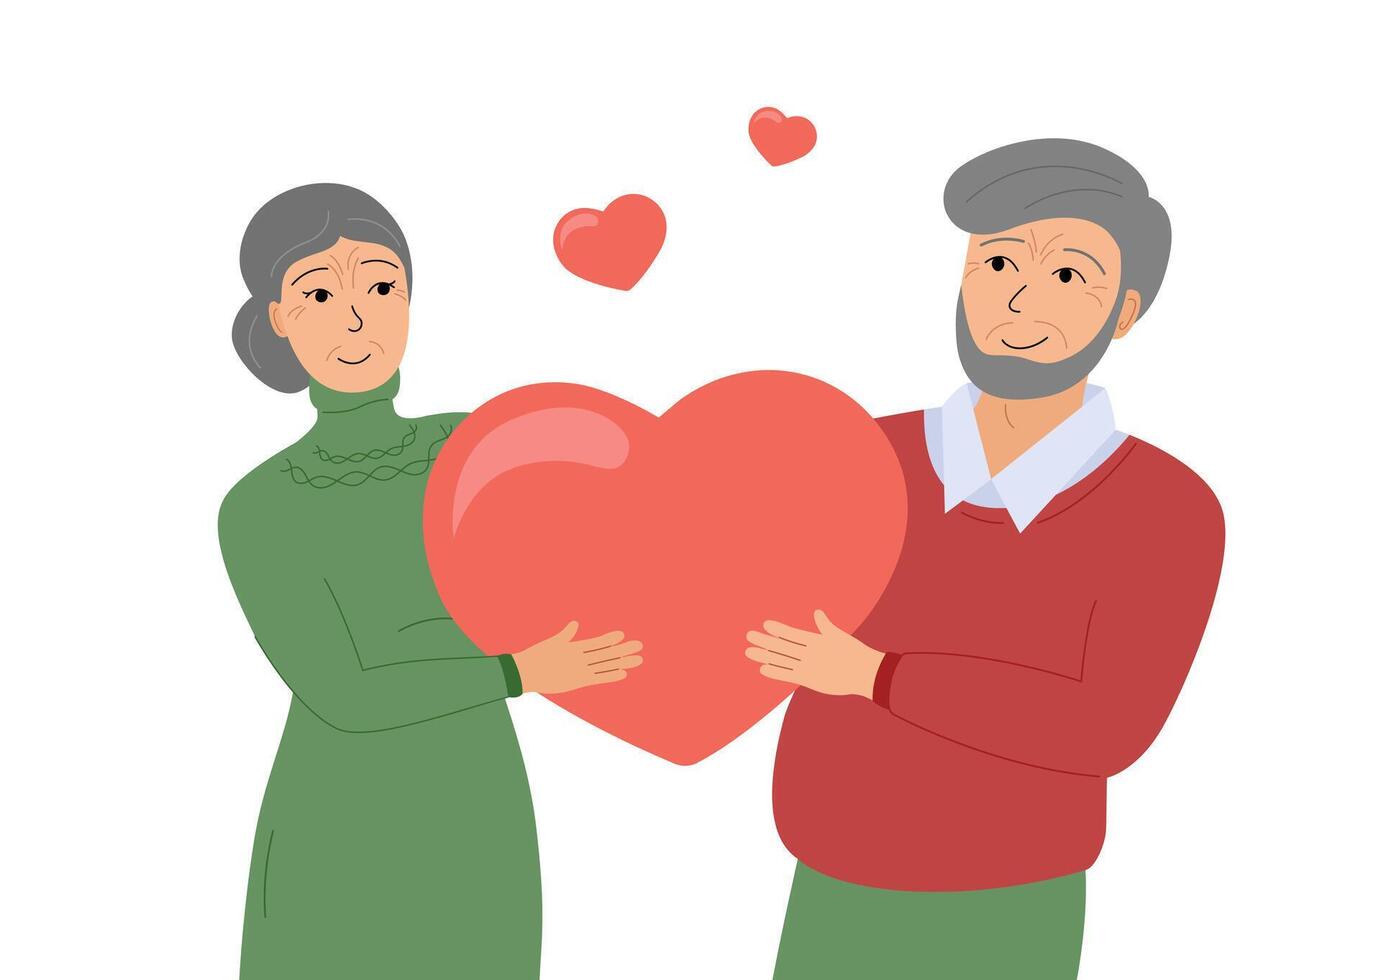 Elderly Couple in love. Senior people in romantic relationship. Retired woman and man holding big heart together. Happy mature lovers. Sweethearts flat vector illustration for Valentines Day